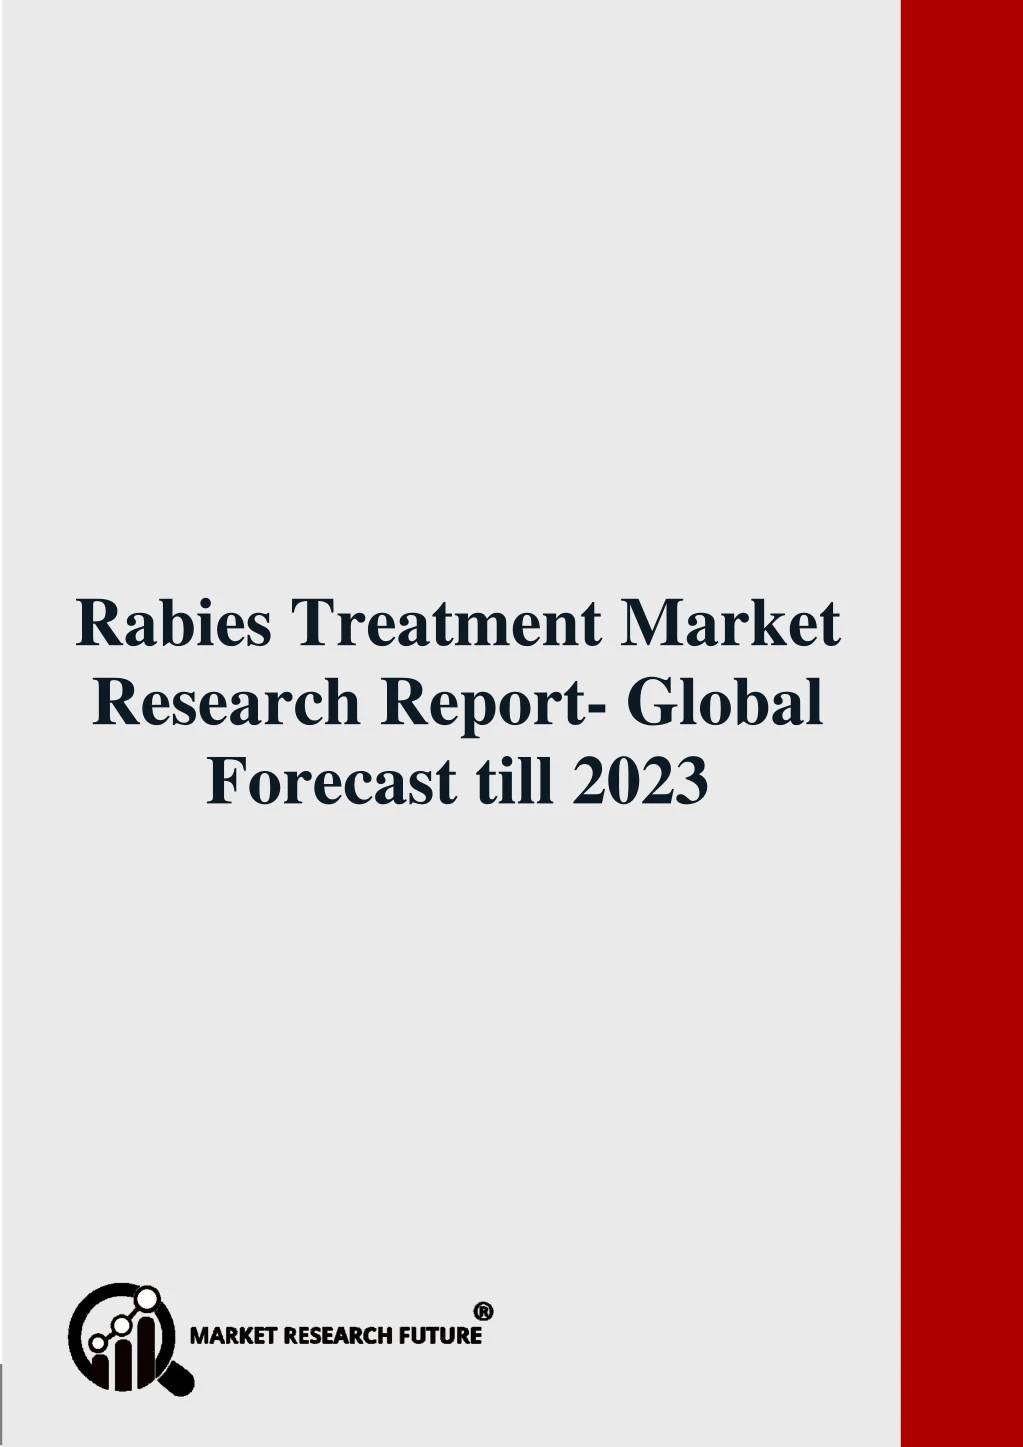 rabies treatment market research report global